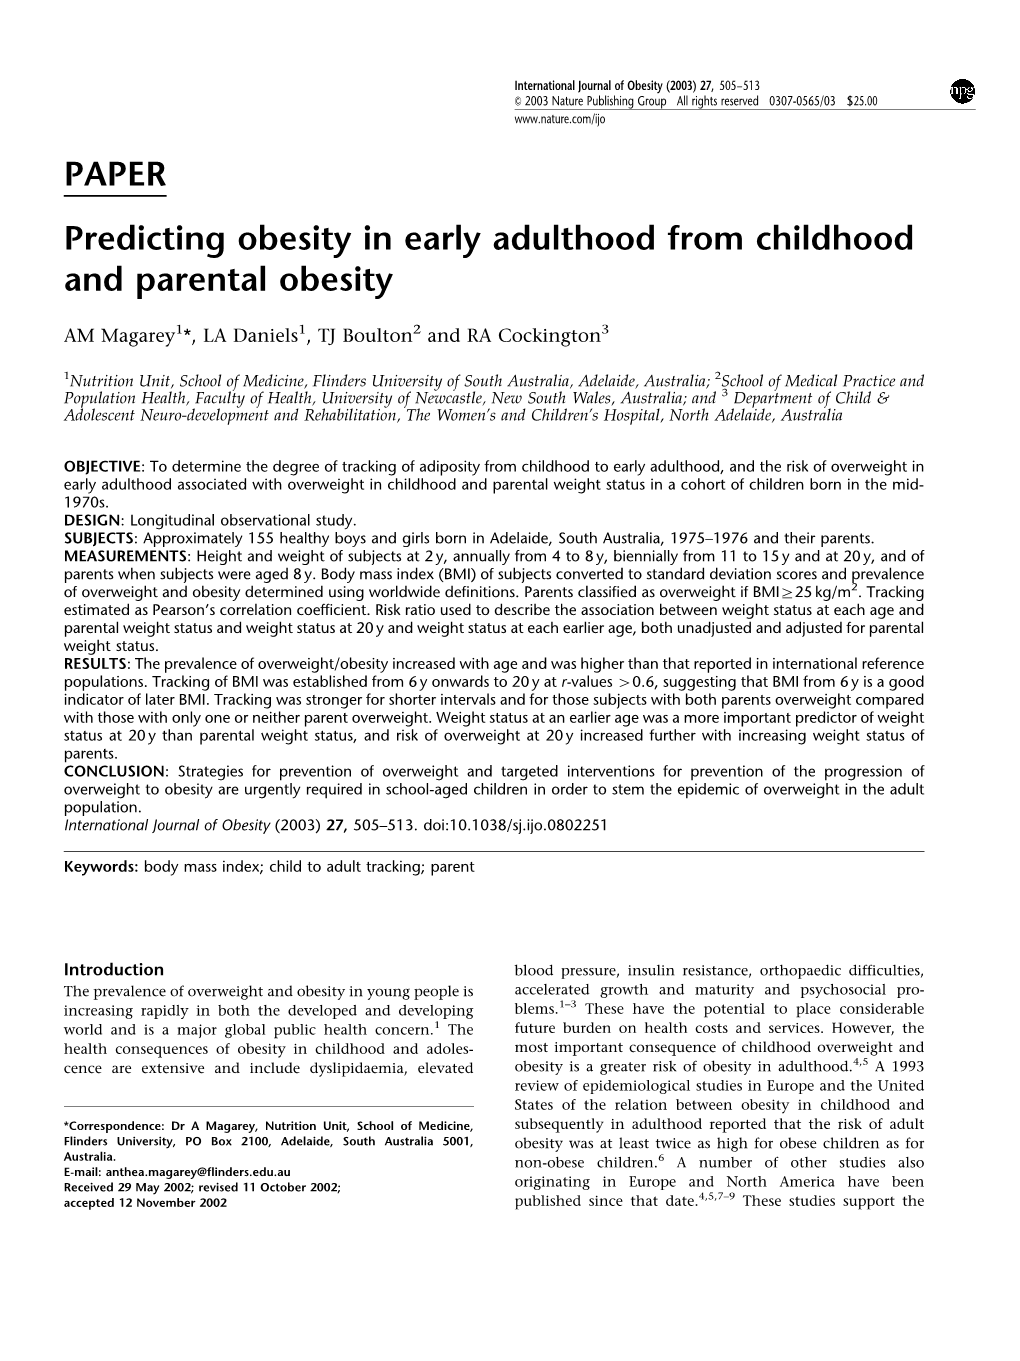 PAPER Predicting Obesity in Early Adulthood from Childhood and Parental Obesity